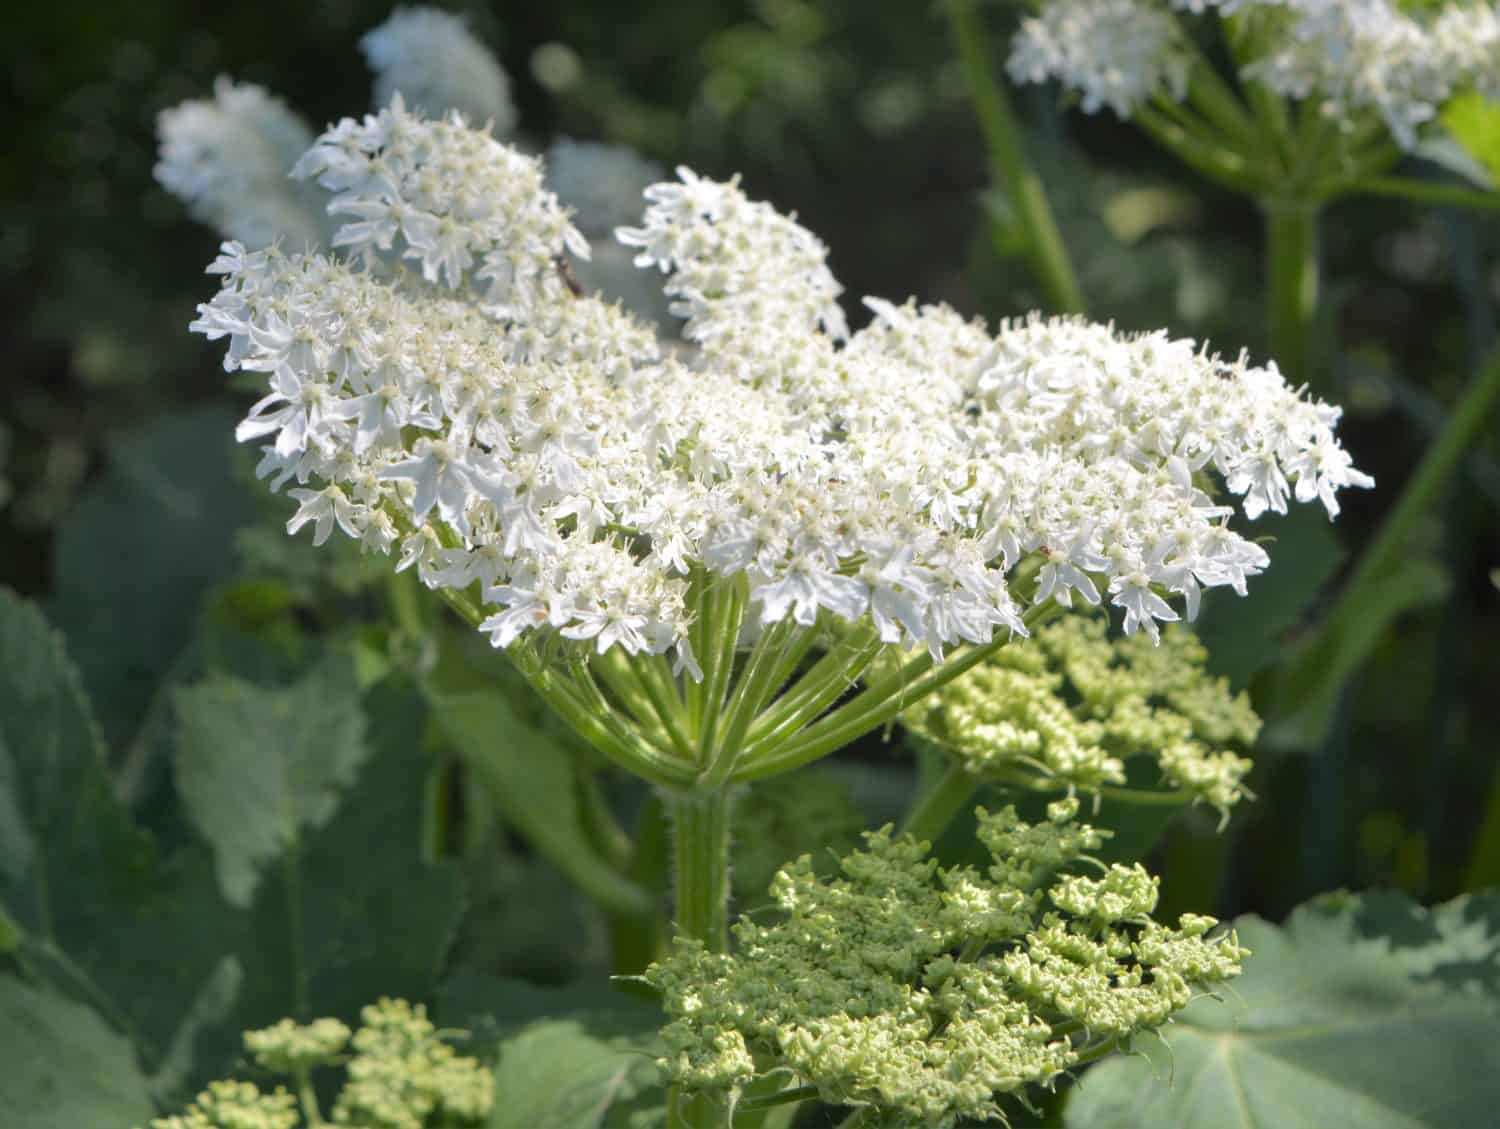 Heracleum mantegazzianum, commonly known as giant hogweed, is a monocarpic perennial herbaceous flowering plant in the carrot family Apiaceae